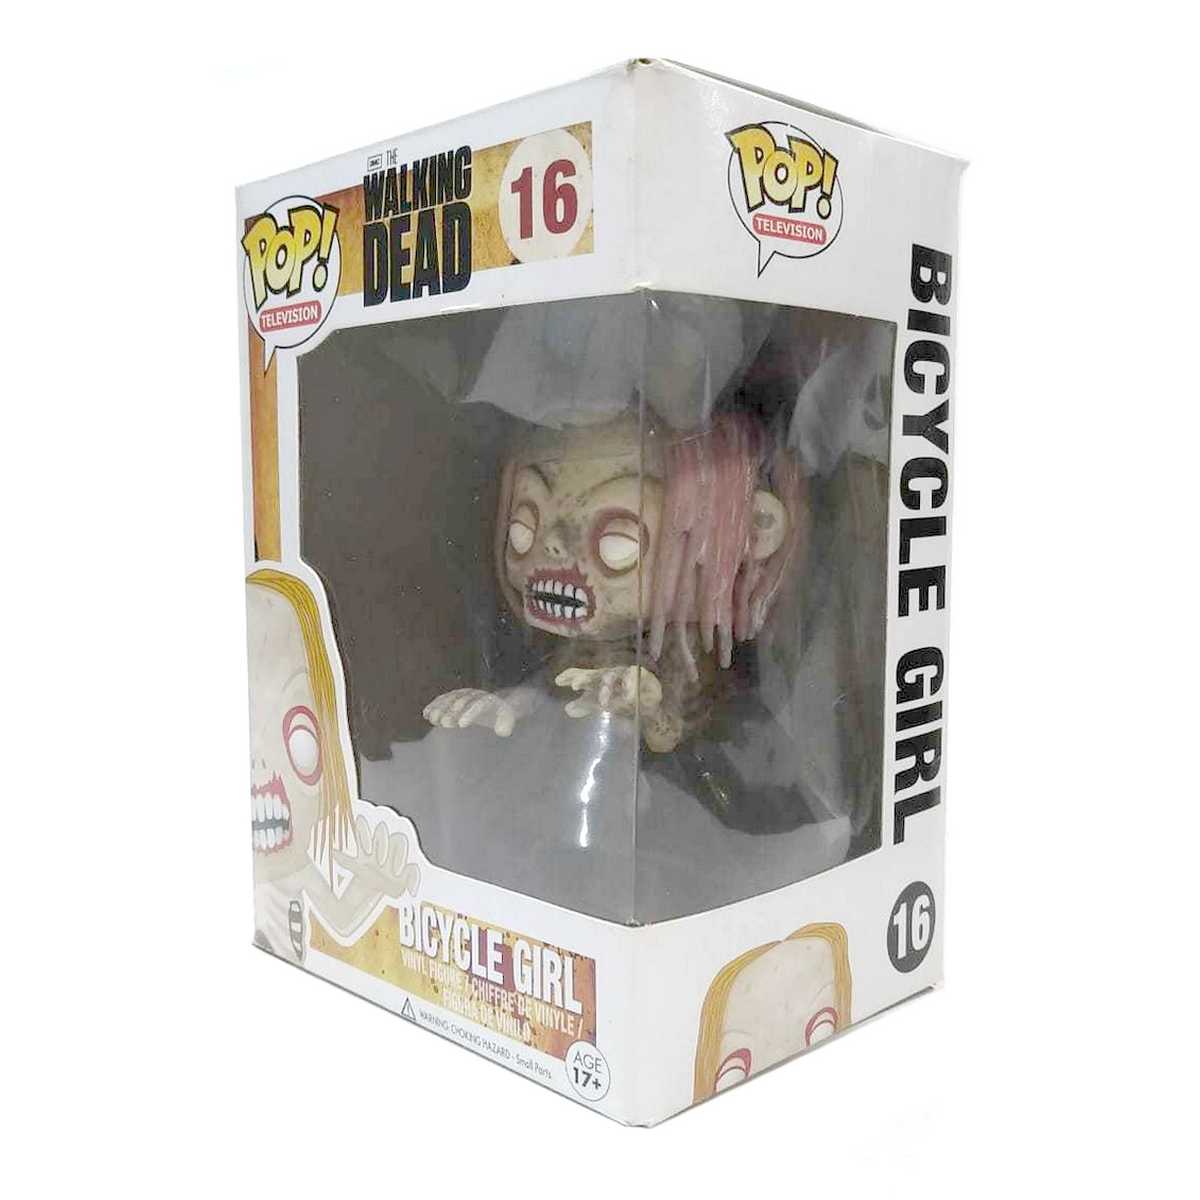 Funko Pop! Television The Walking Dead Bicycle Girl vinyl figure número 16 Vaulted